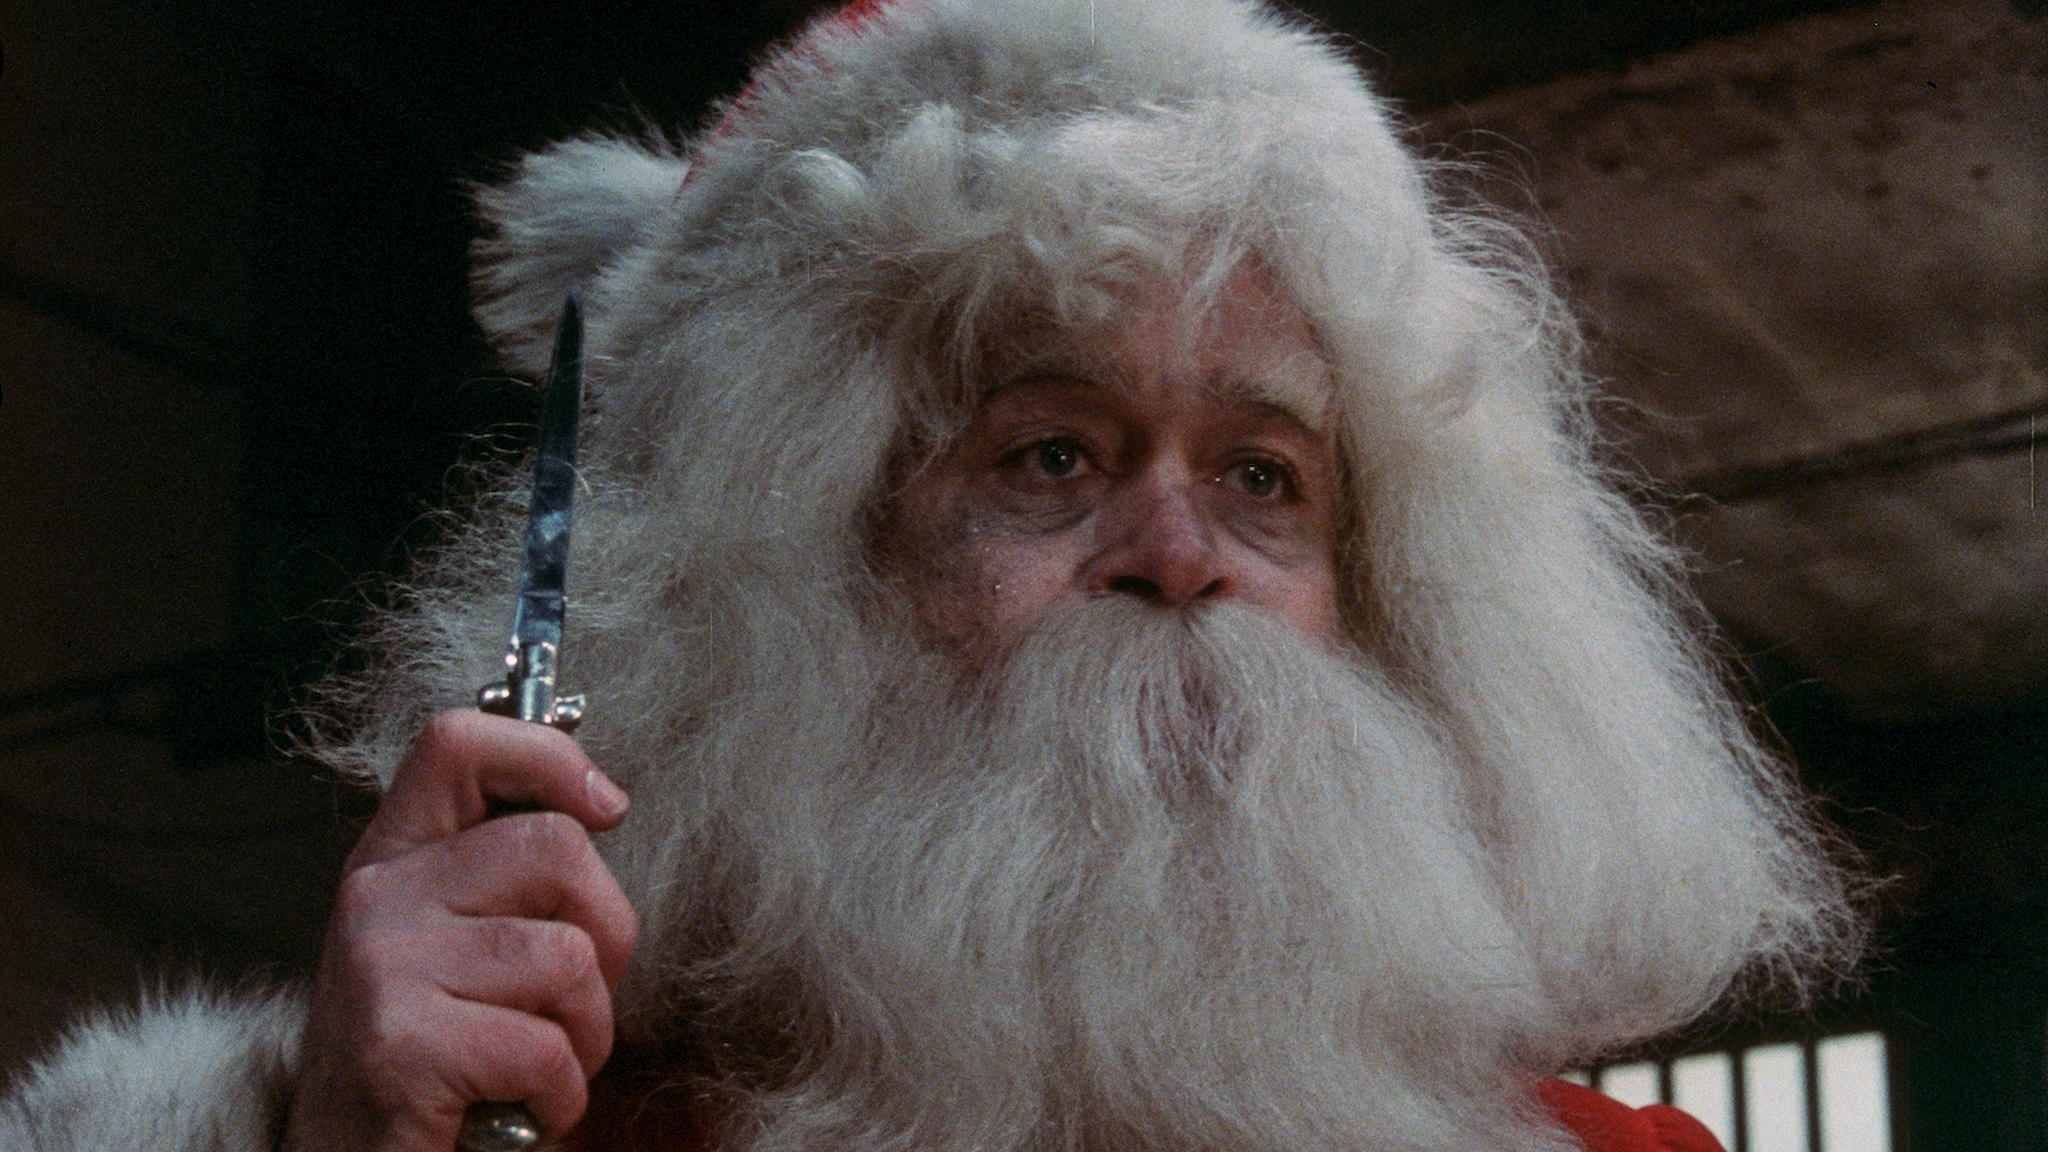 This is a still image from the film, Christmas Evil.